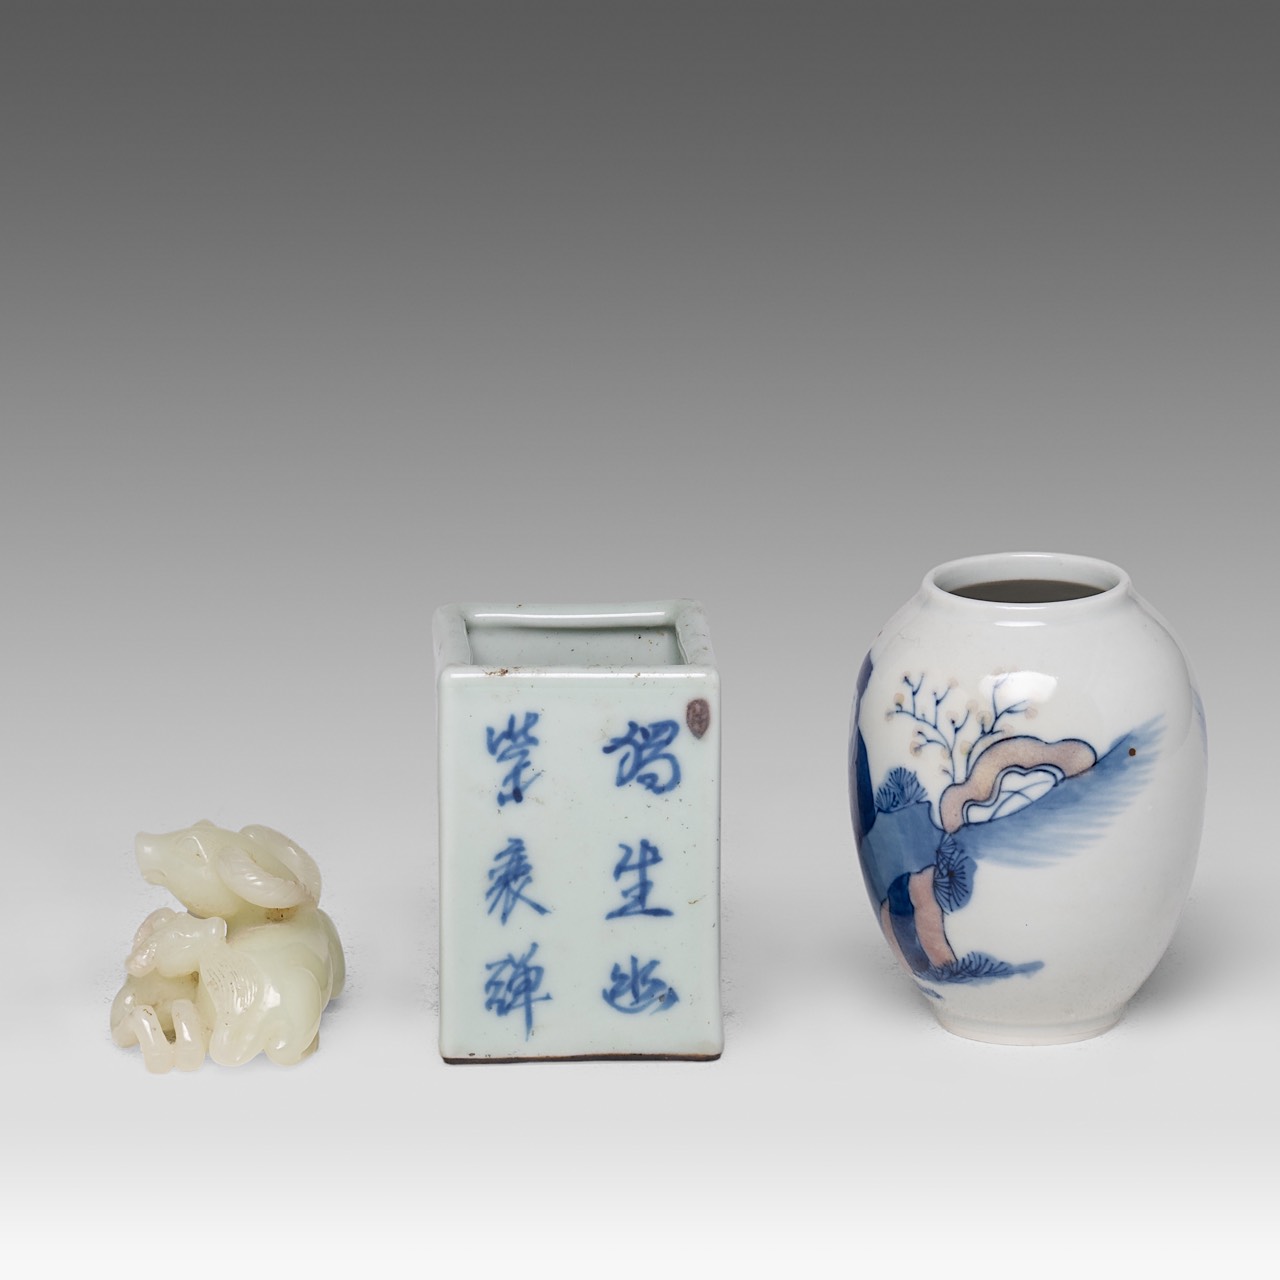 A collection of four Chinese scholar's objects, incl. a brush pot with inscriptions, late 18thC - ad - Image 3 of 29